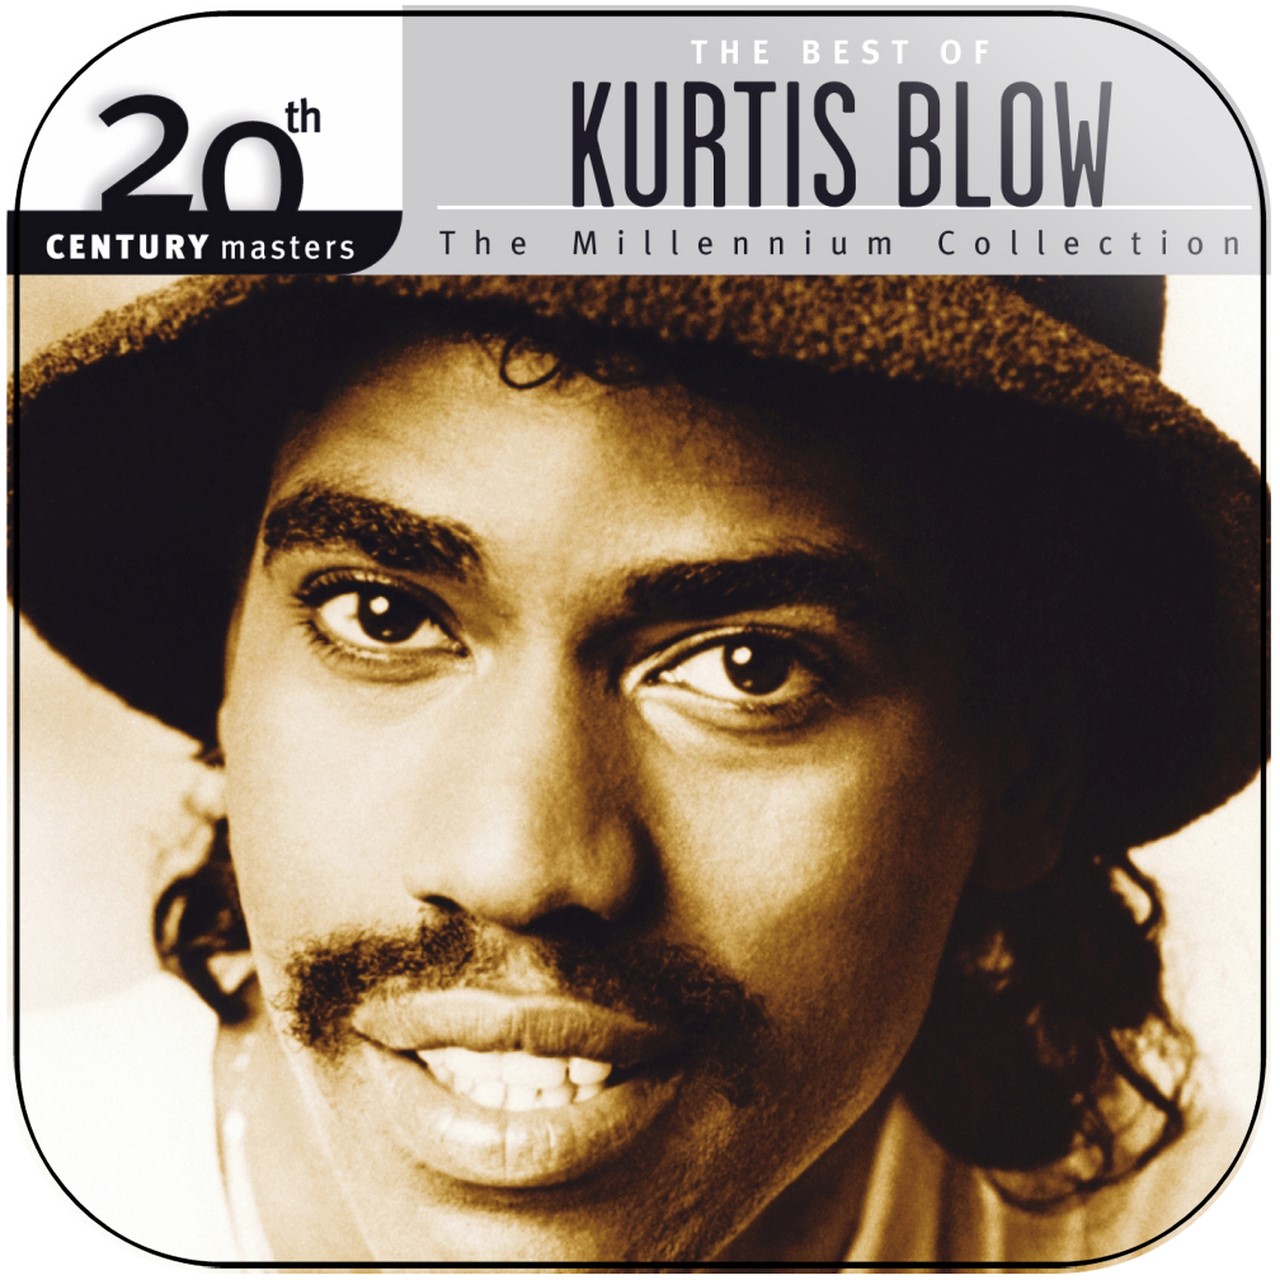 Key Tracks: Kurtis Blow's Self-Titled Debut Album | Red Bull Music Academy  Daily